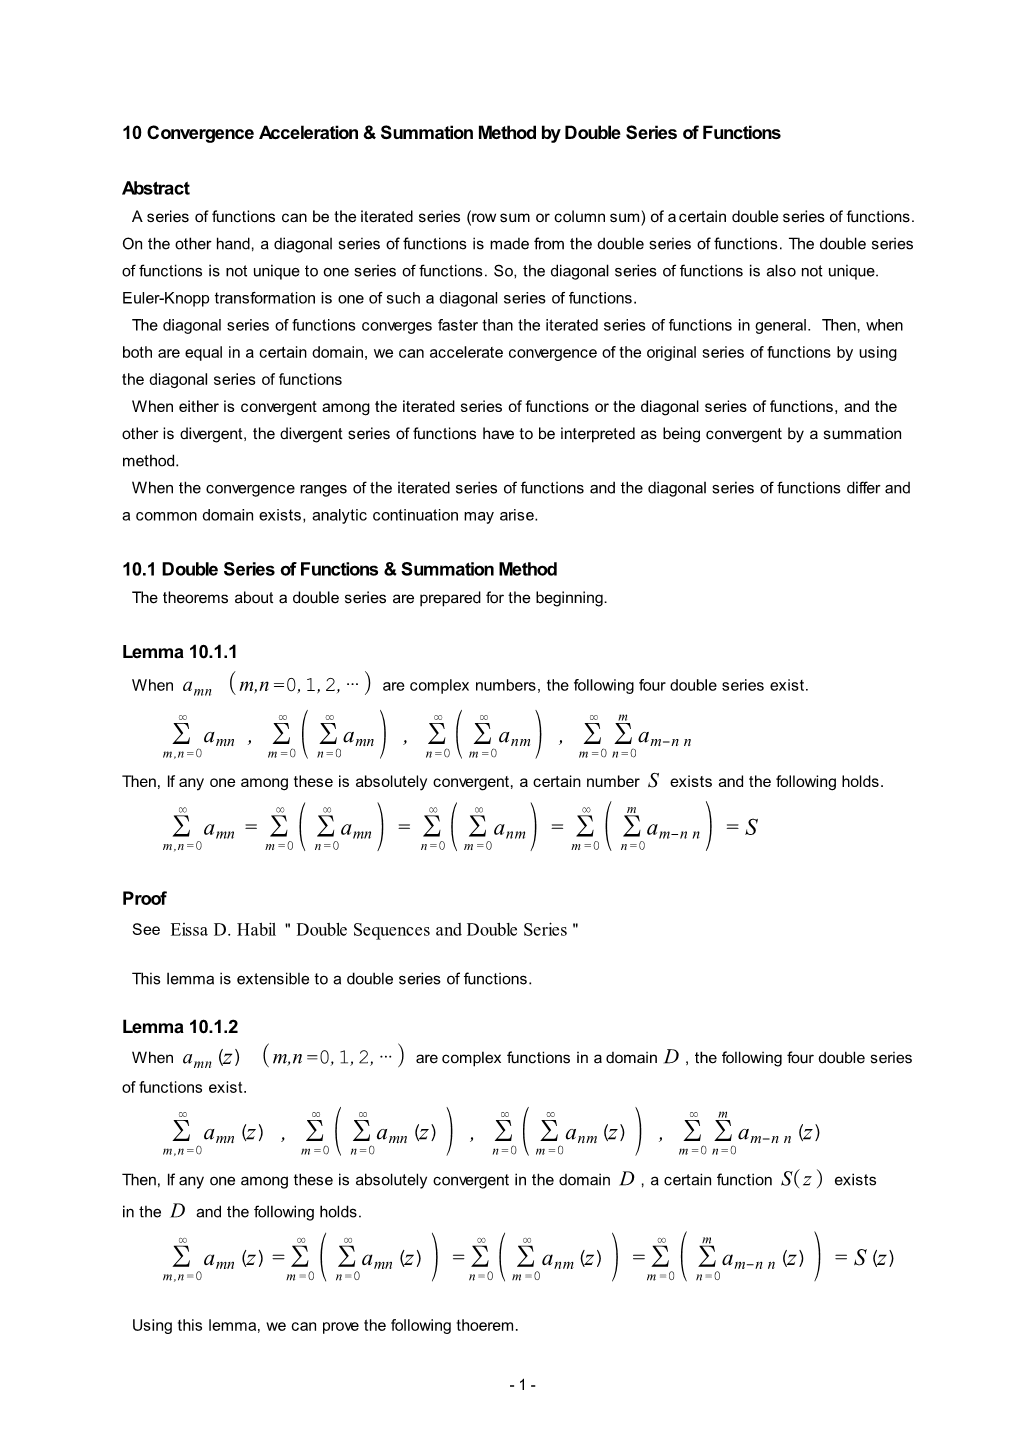 Convergence Acceleration & Summation Method by Double Series of Functions